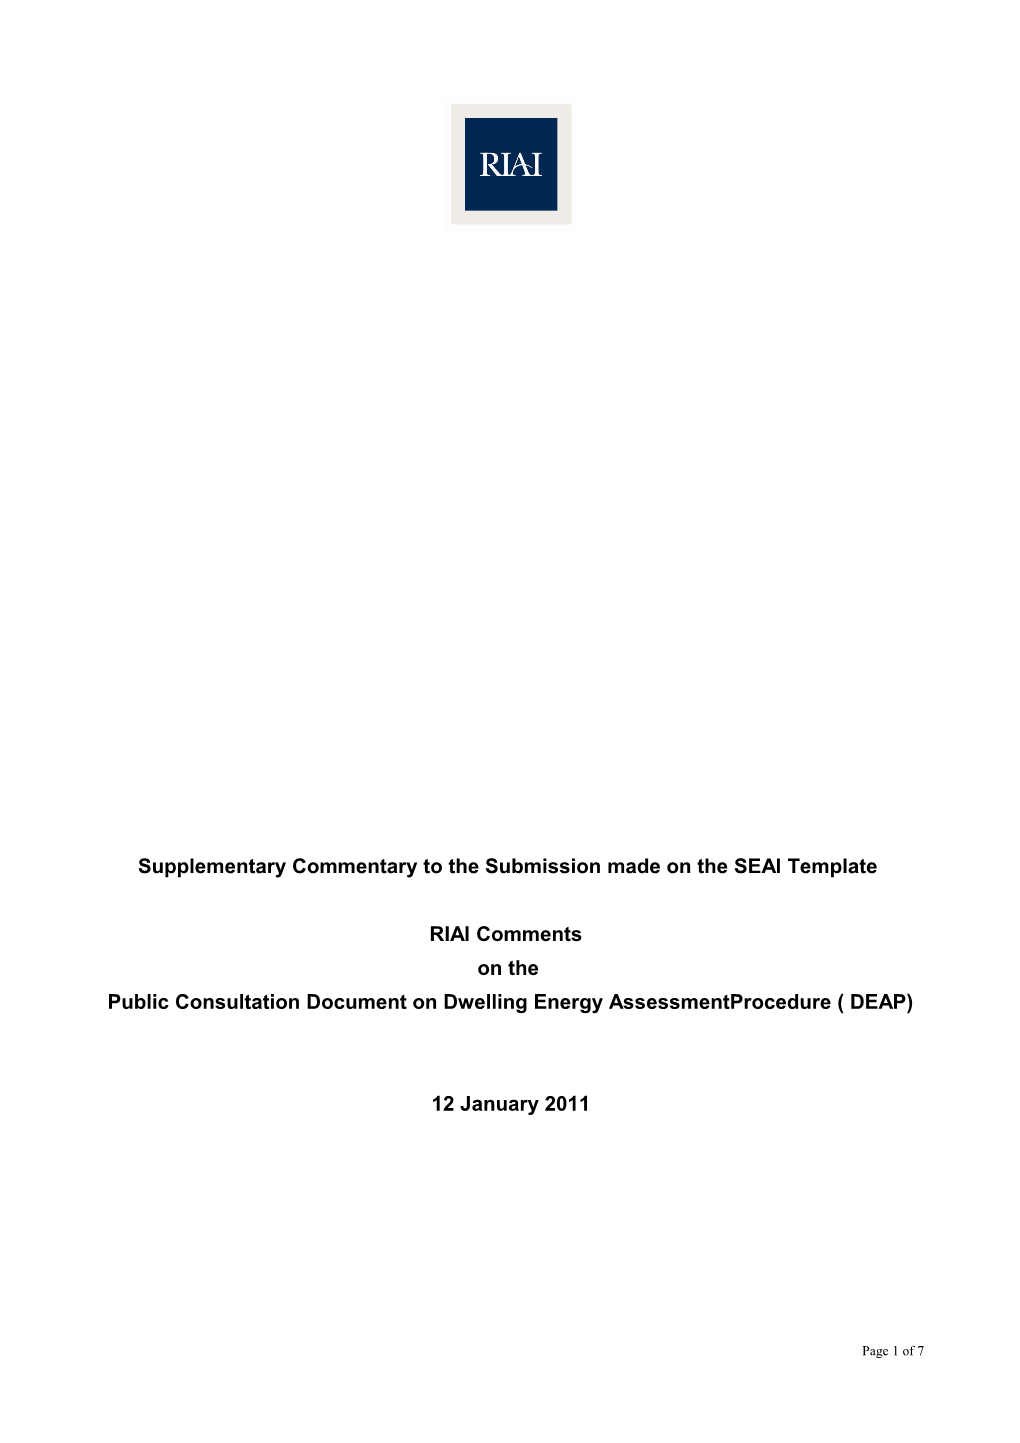 Supplementary Commentary to the Submission Made on the SEAI Template